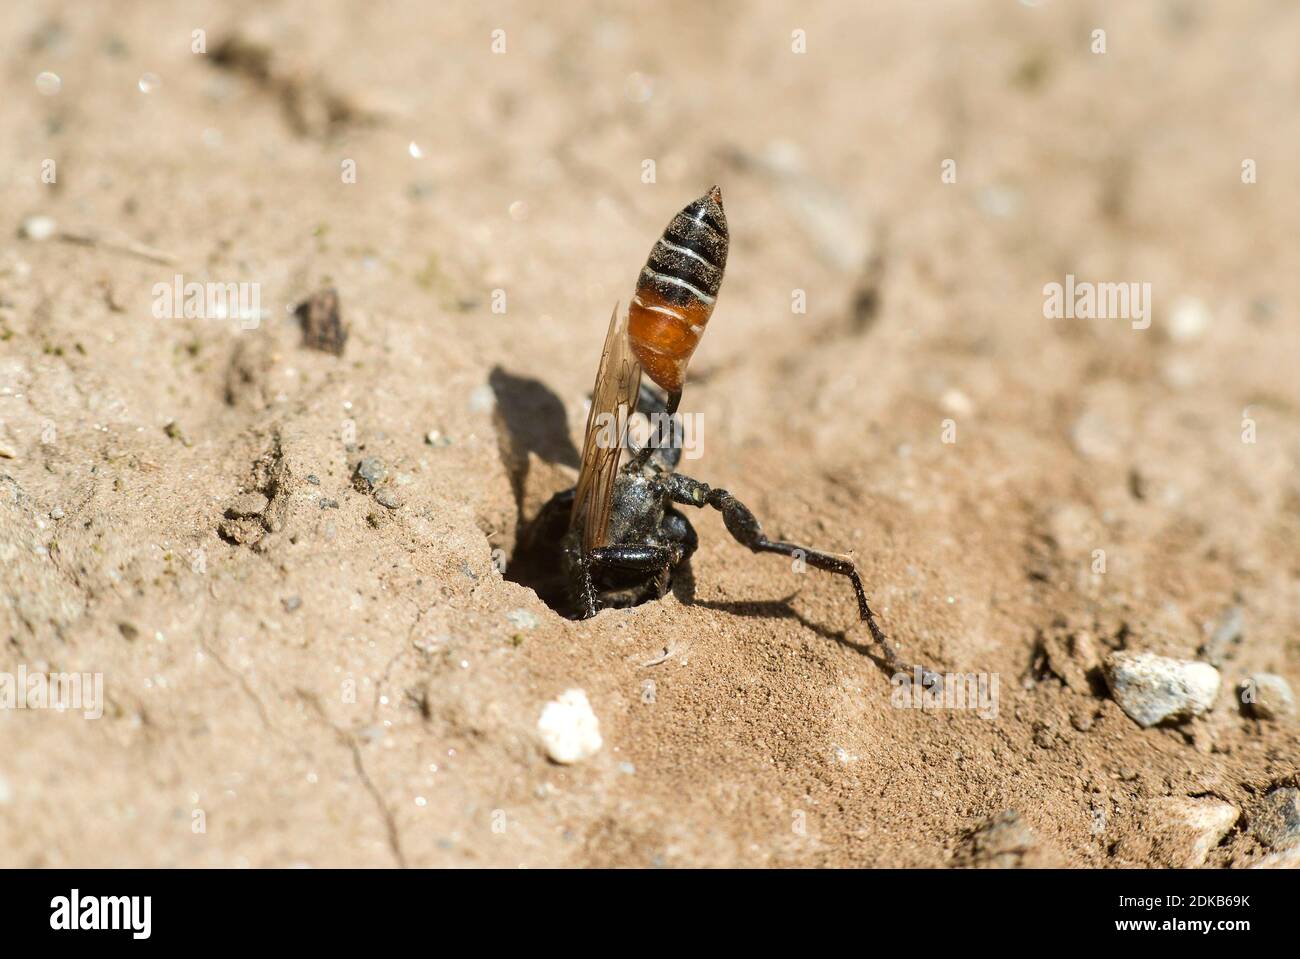 Female of Prionyx kirbii, a thread-waisted wasp, from the Sphecidae family,  digging a tunnel in sandy soil, preparing vor nesting,Valais, Switzerland Stock Photo